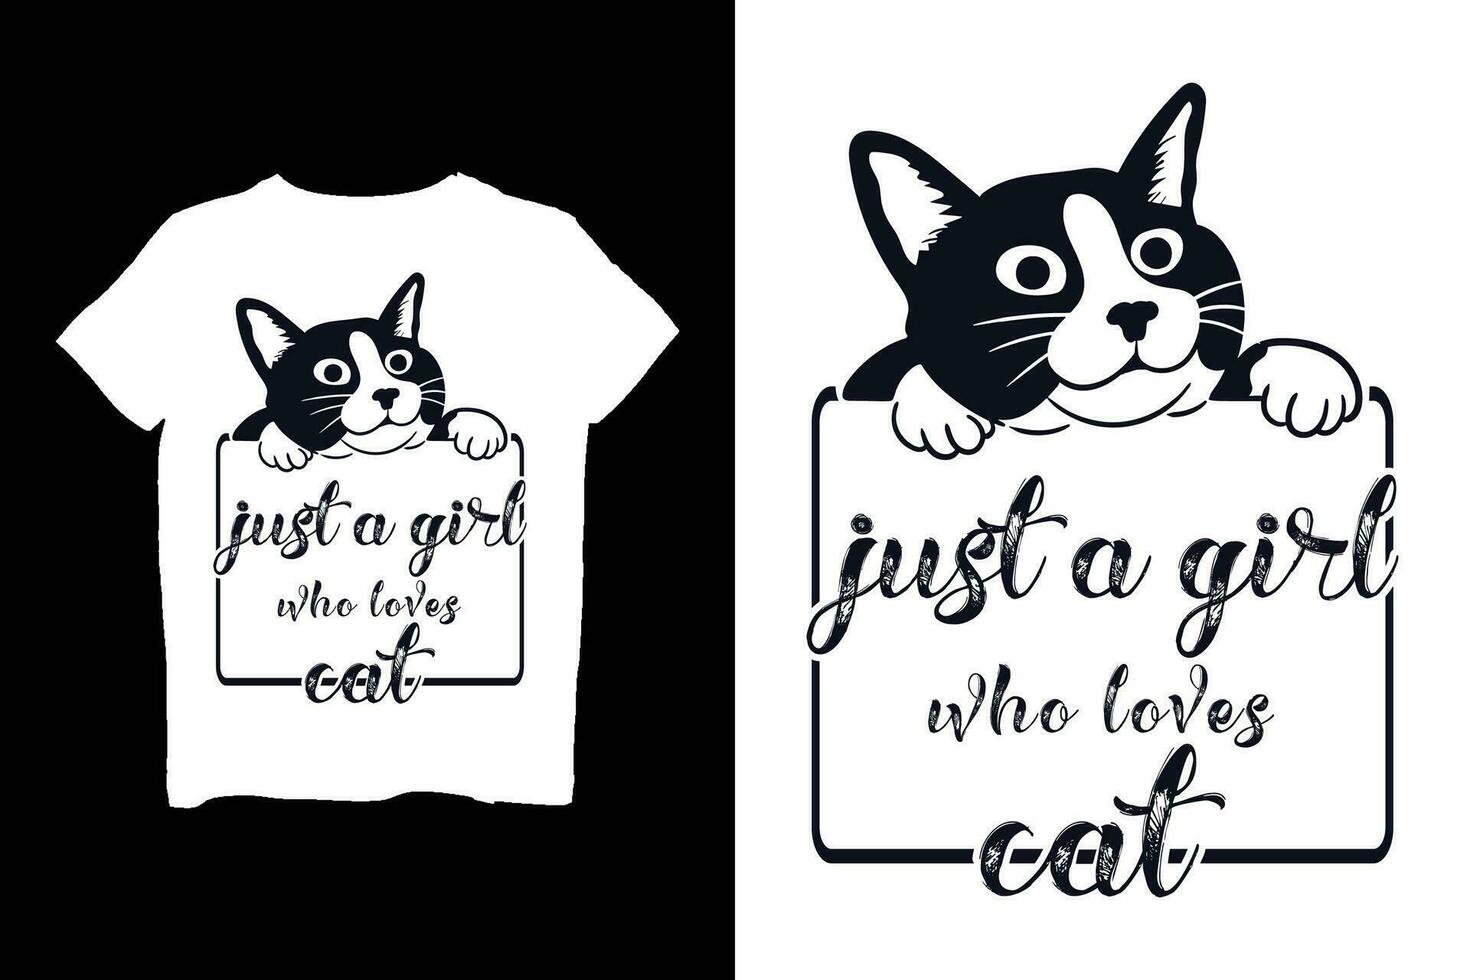 just a girl who loves cat t shirt vector